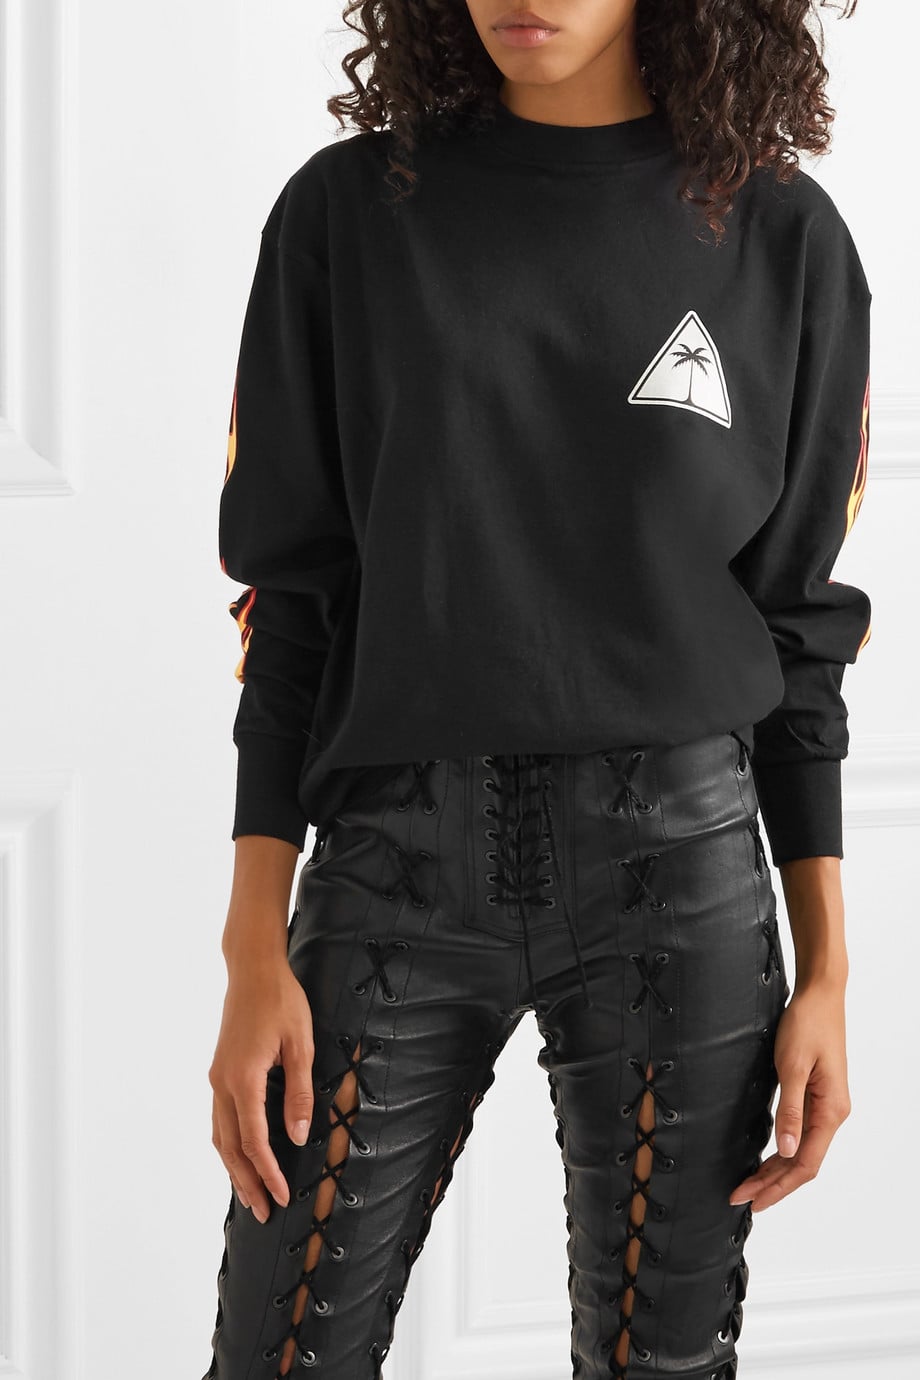 Kendall Jenner's I See Ghosts Sweatshirt 2018